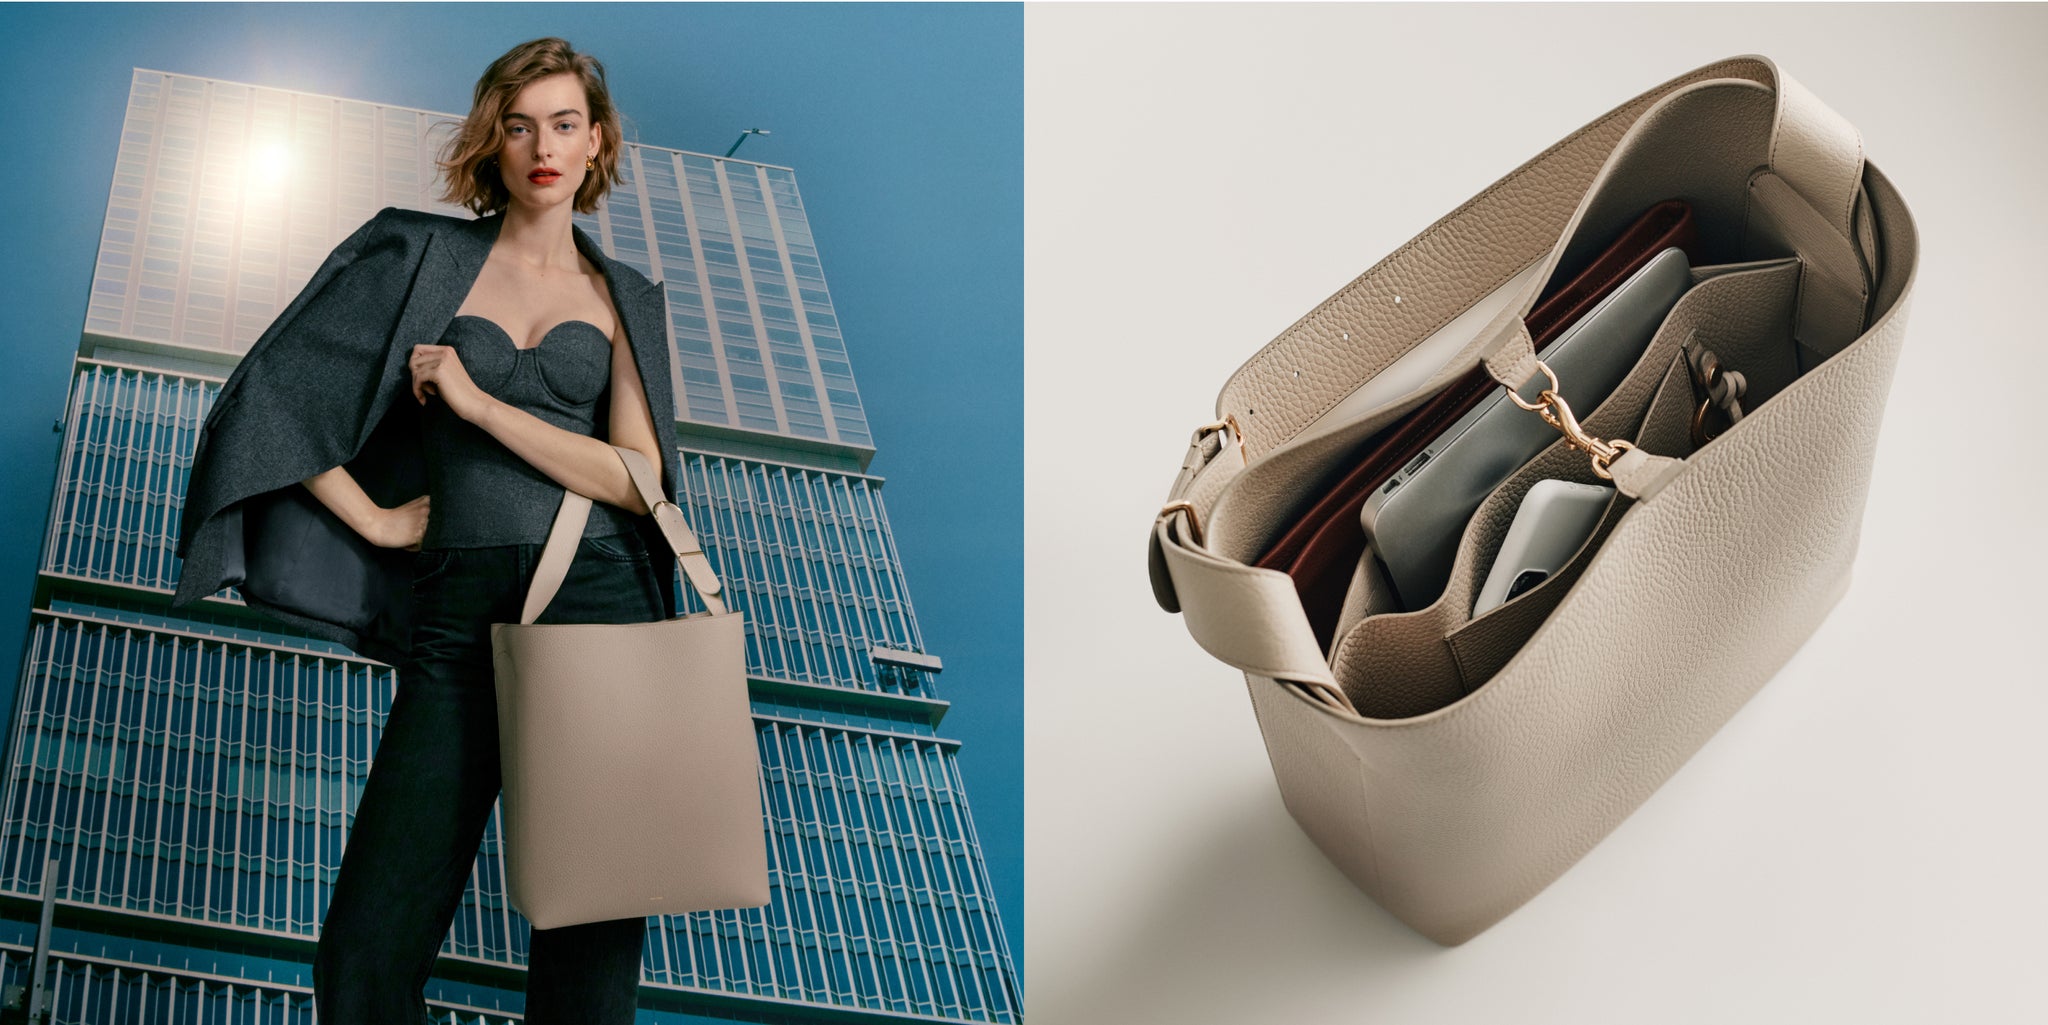 Woman with a handbag standing by a tall building; close-up of an open handbag showing compartments.